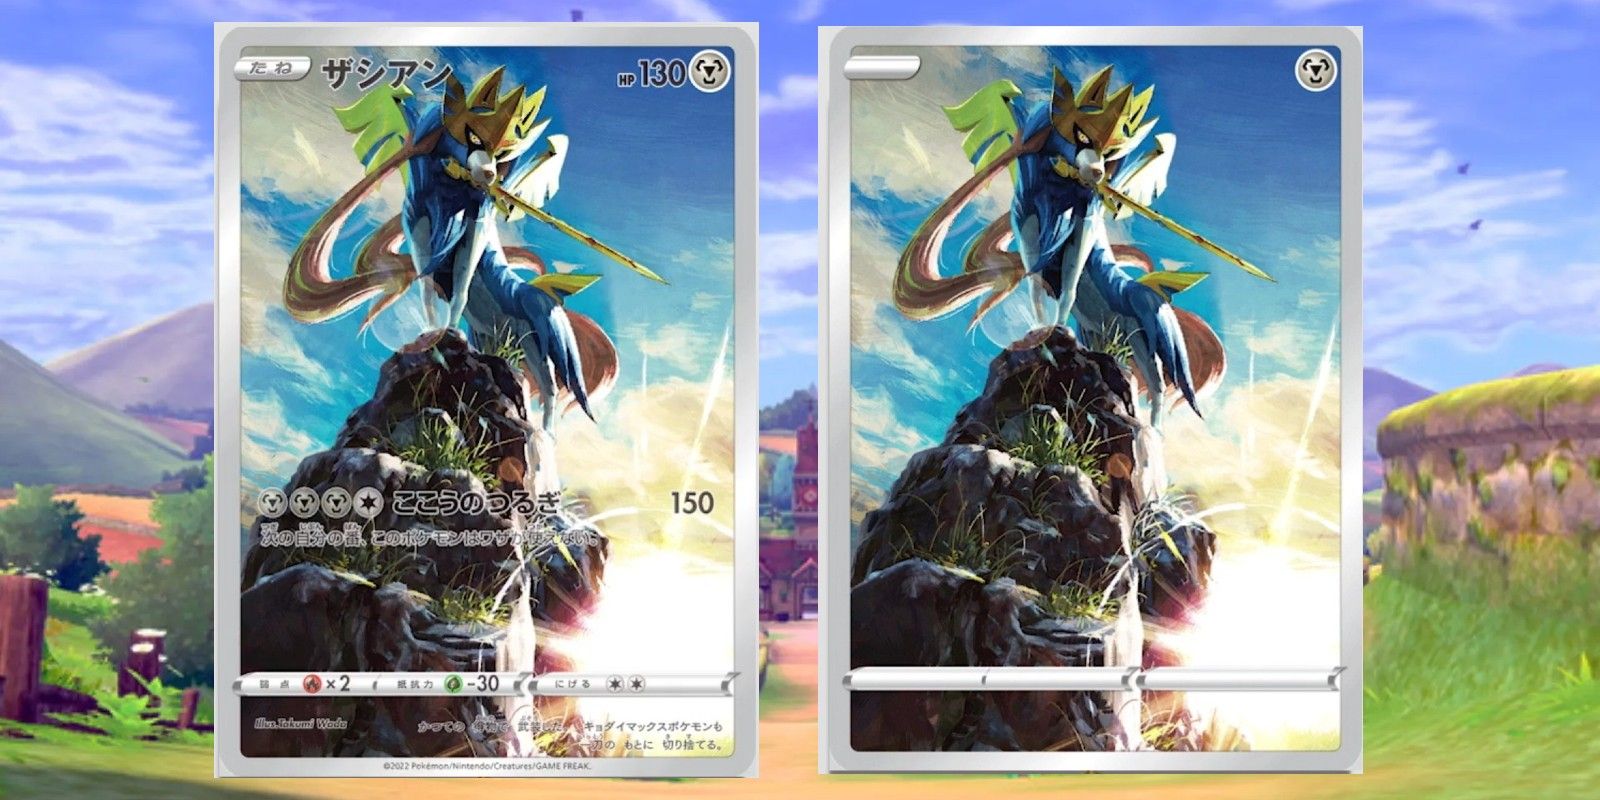 The best illustration for Zacian in Pokémon TCG is an online exclusive.